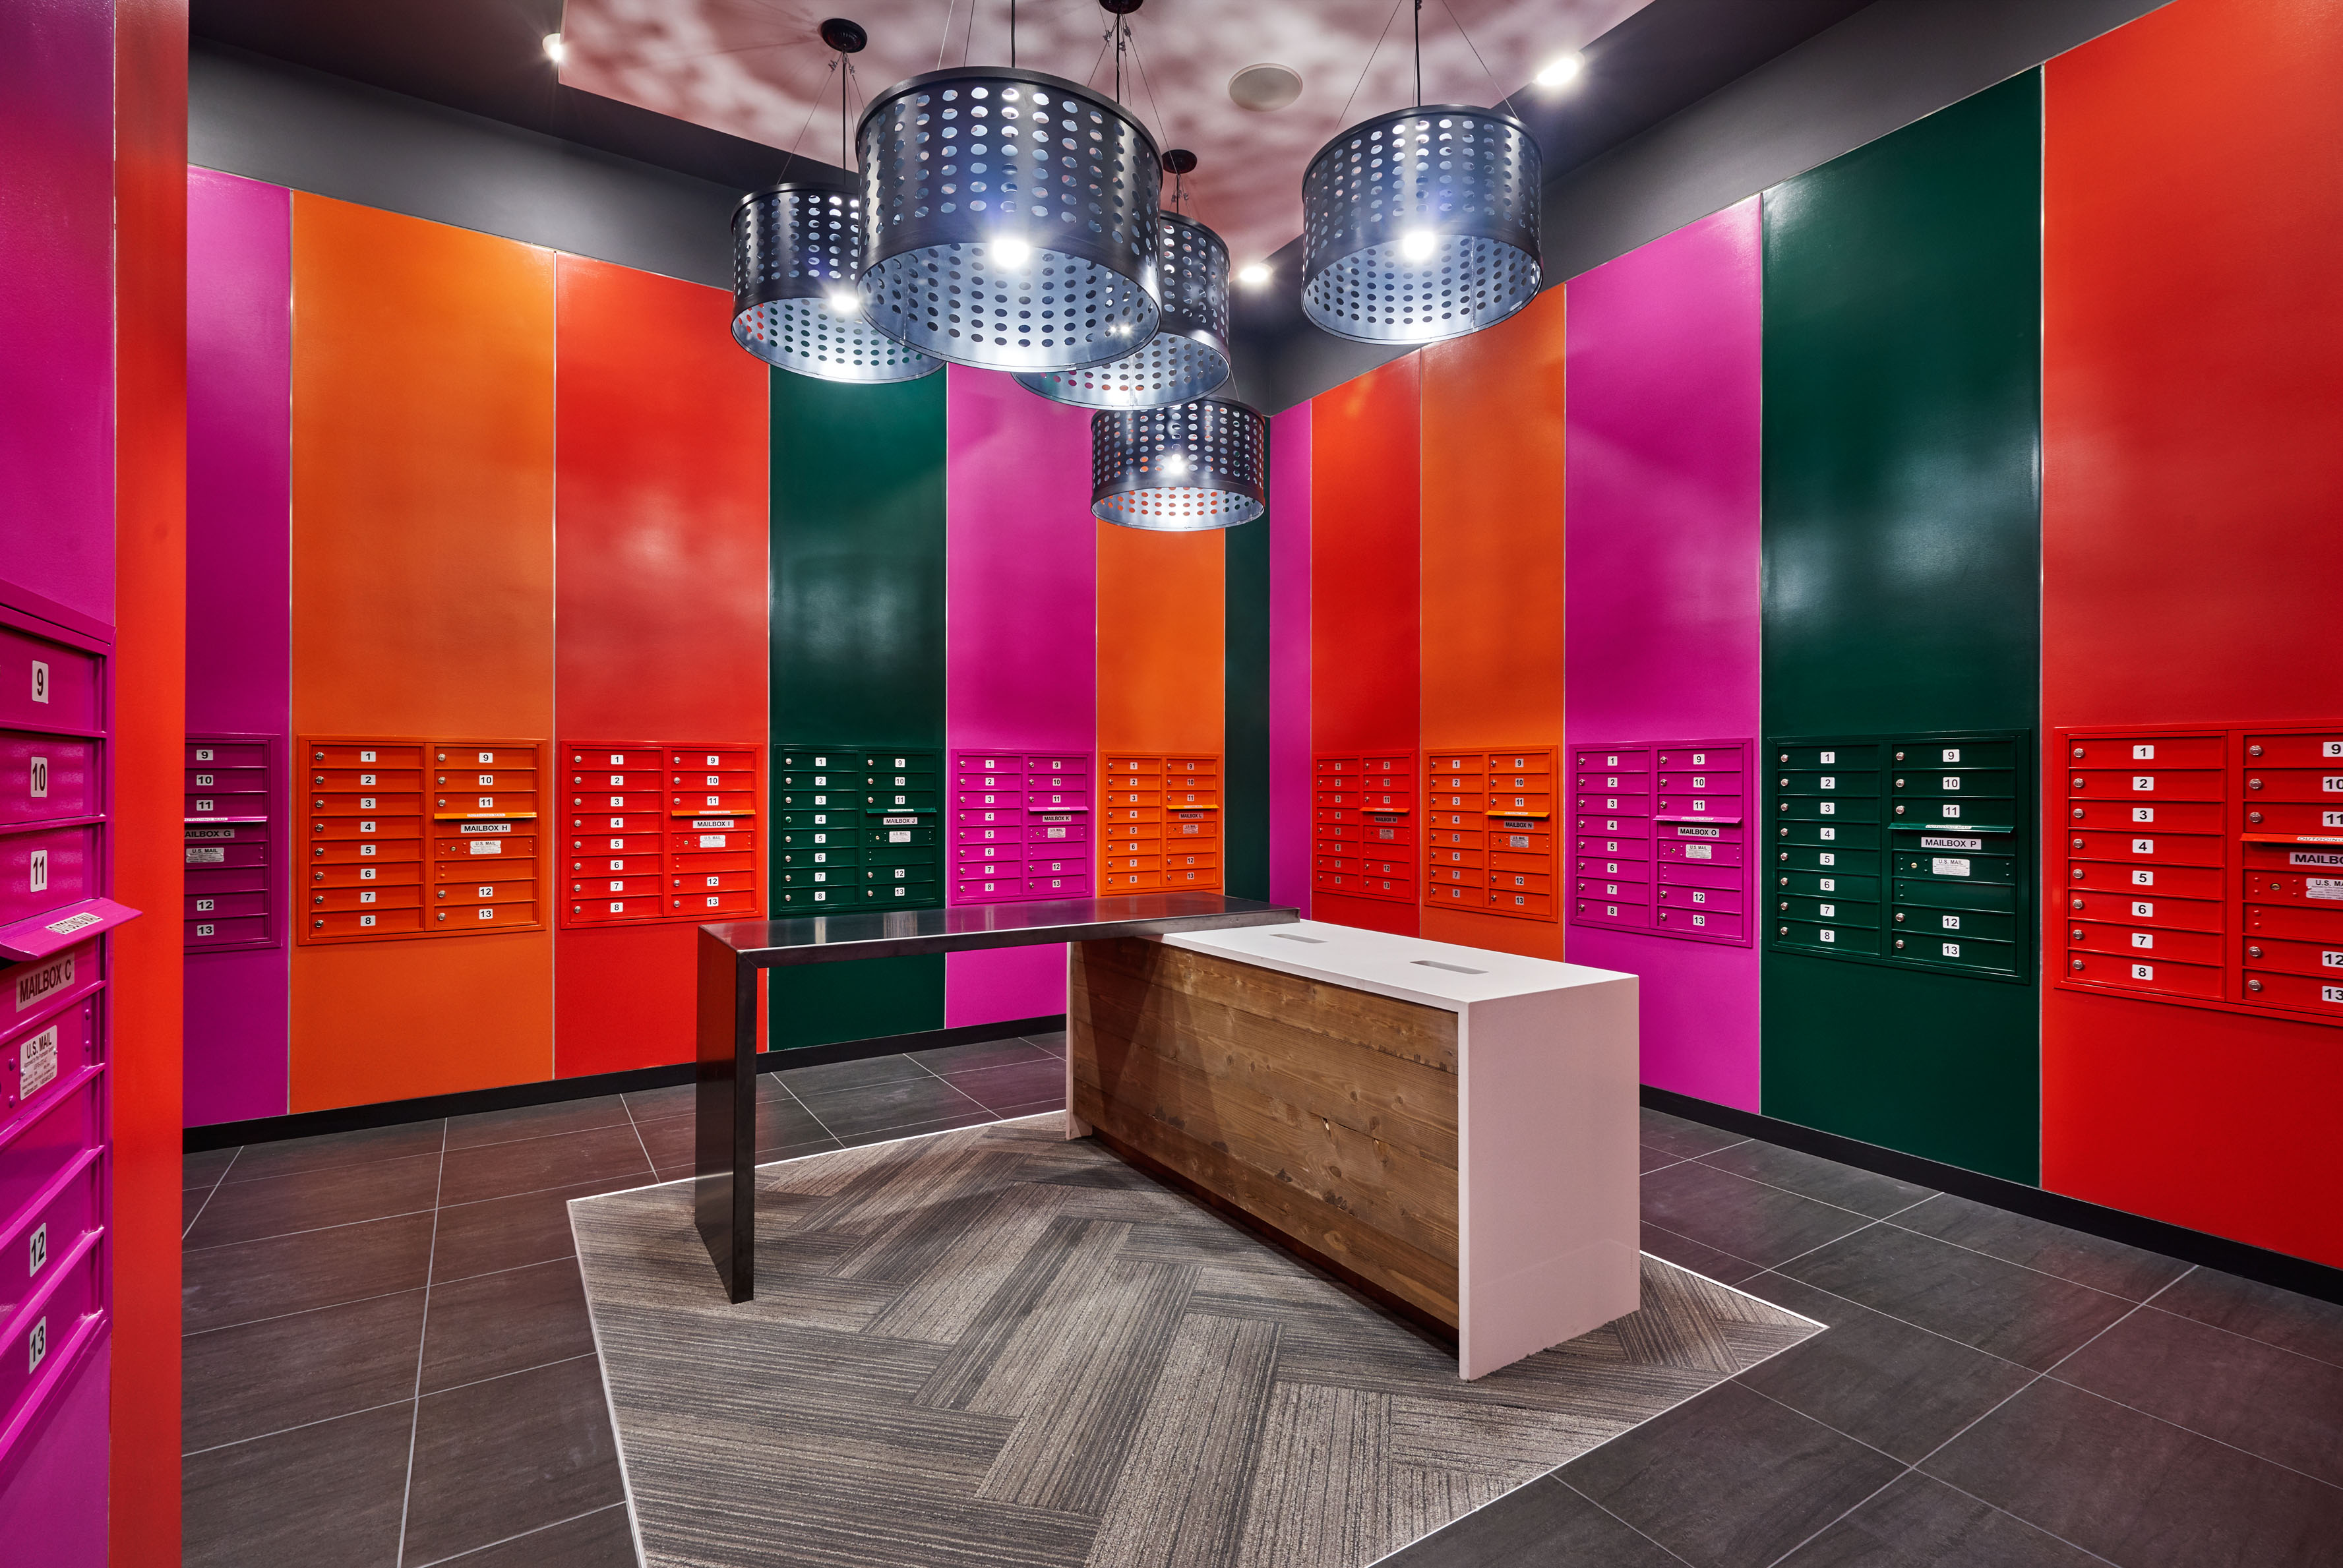 Portland Interior Design Firm Uses Creative Color Solutions for Way-Finding in New Multifamily Project